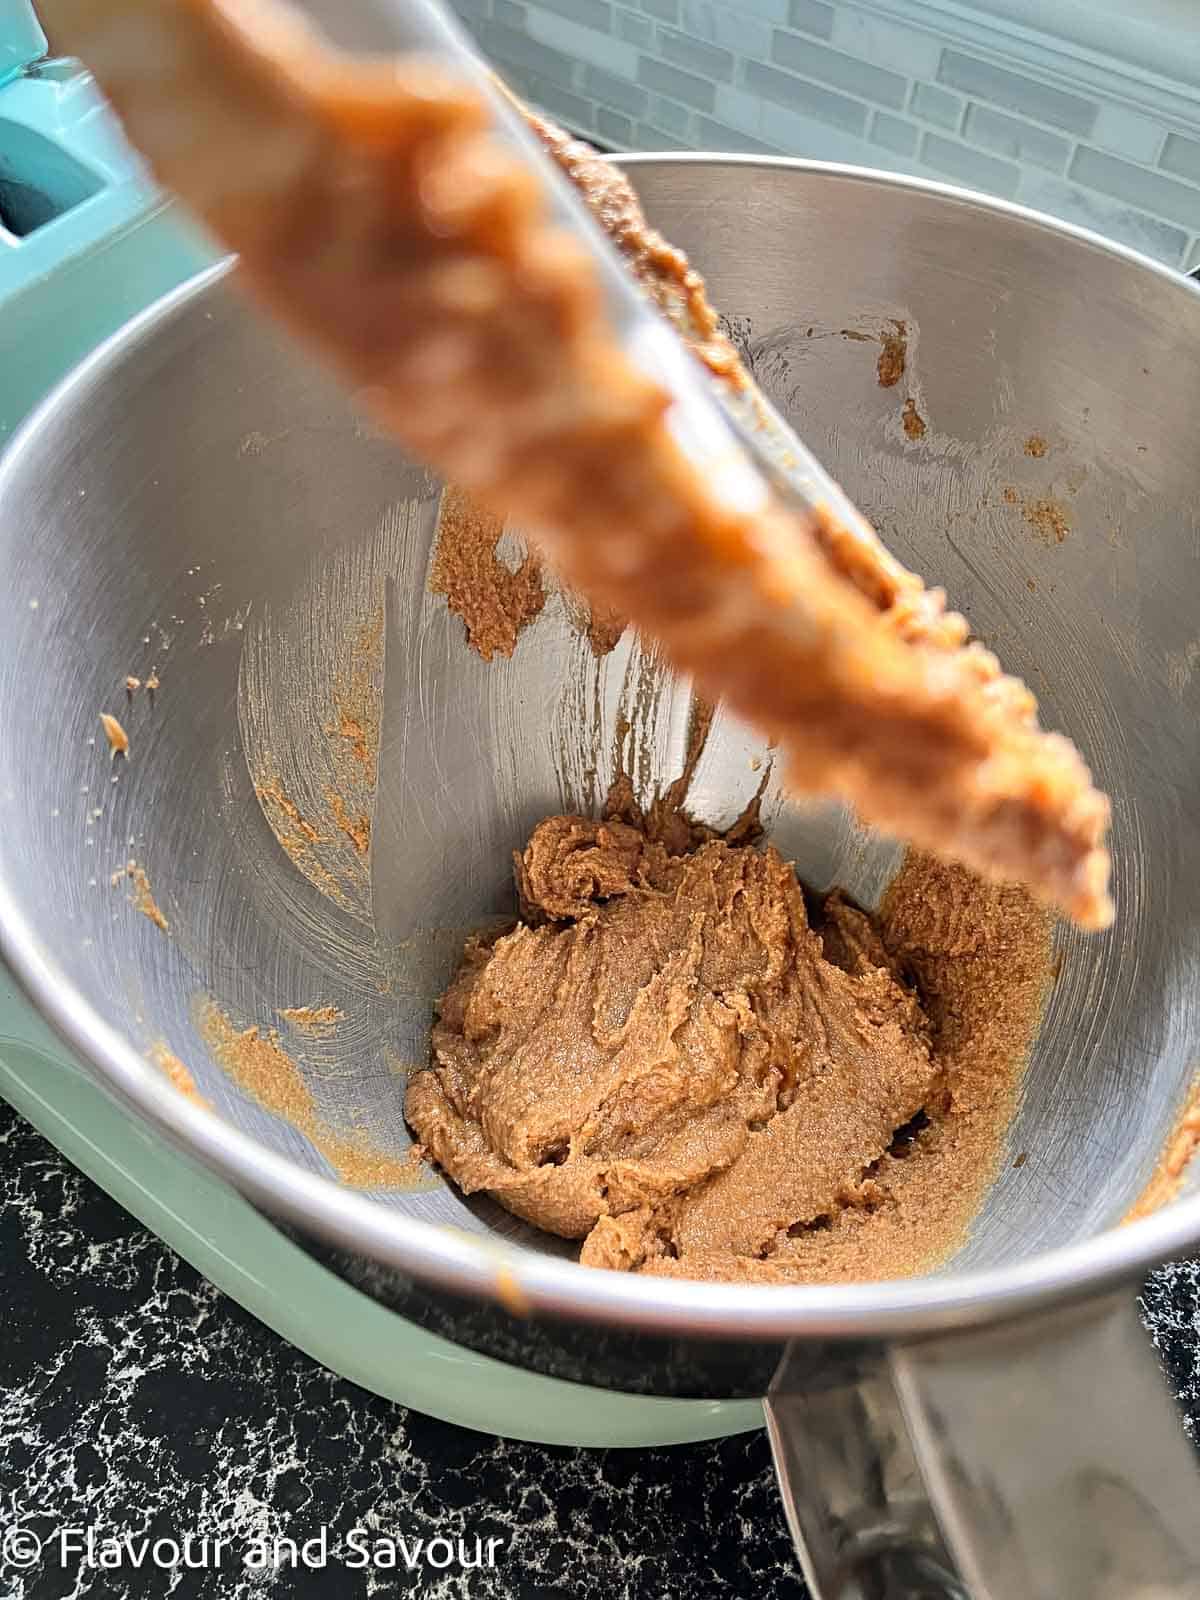 Beating butter, peanut butter, and sugar in a stand mixer.